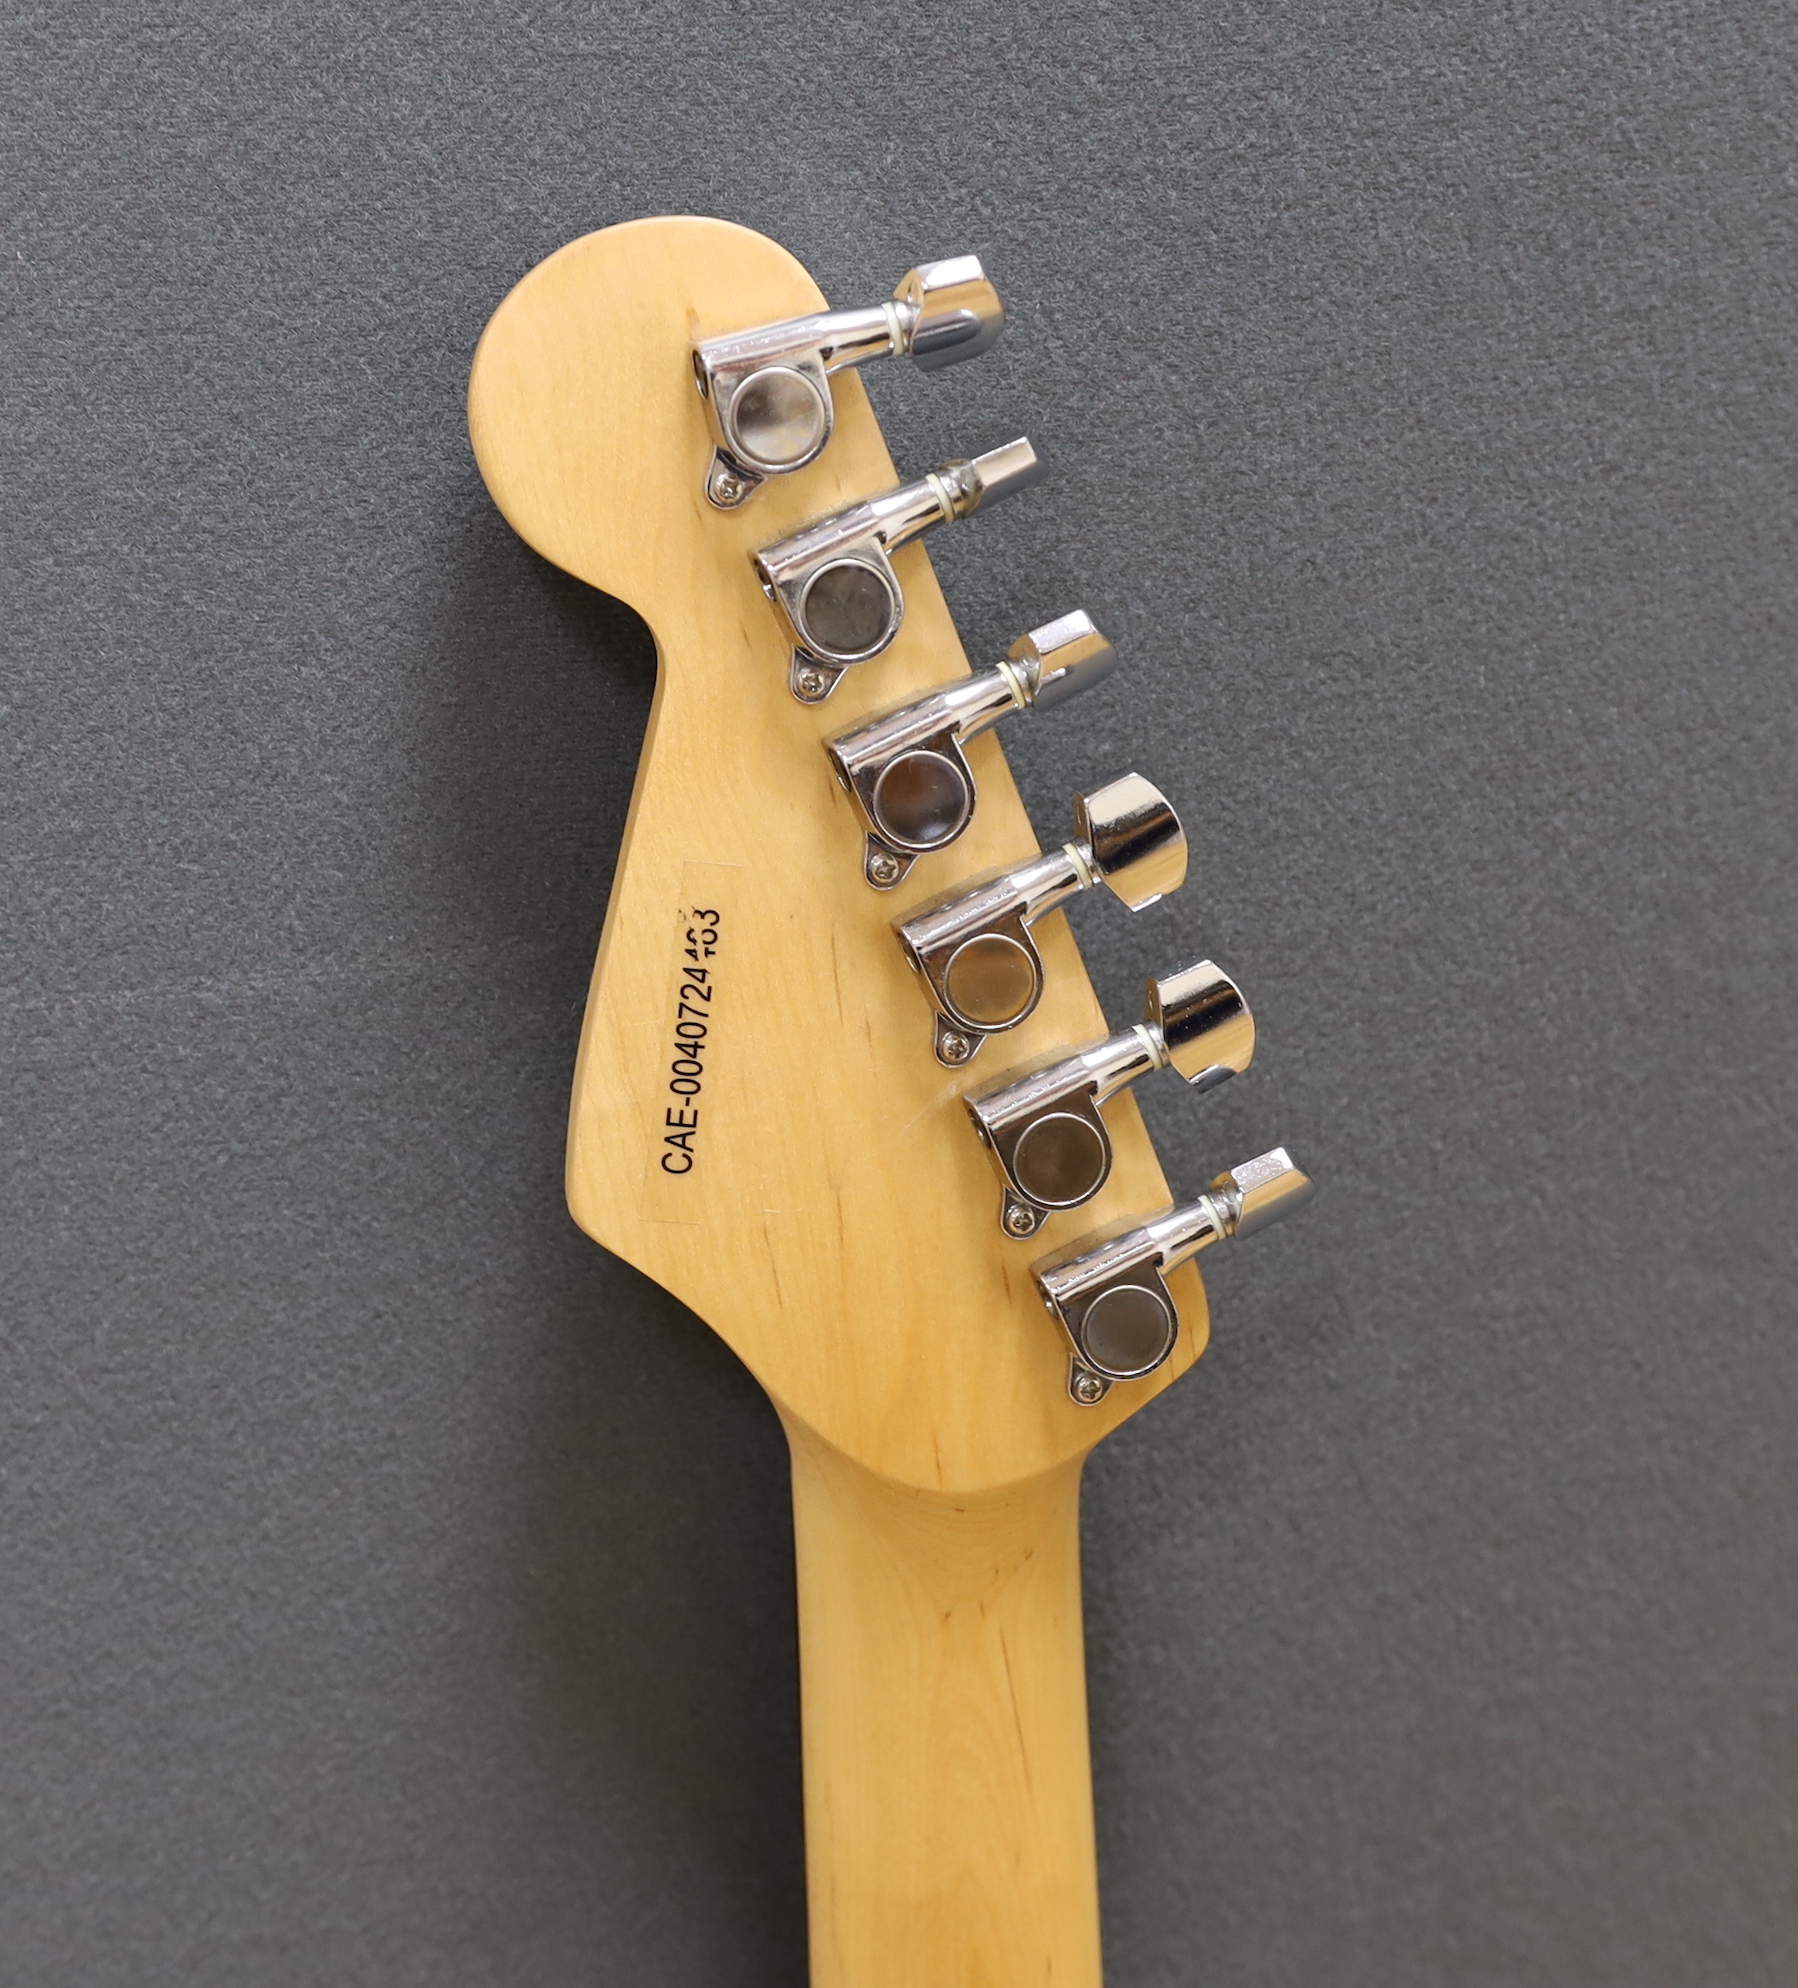 A Squier Strat by Fender Sunburst electric guitar made in China with rosewood neck, together with a small Squire SP-10 amp